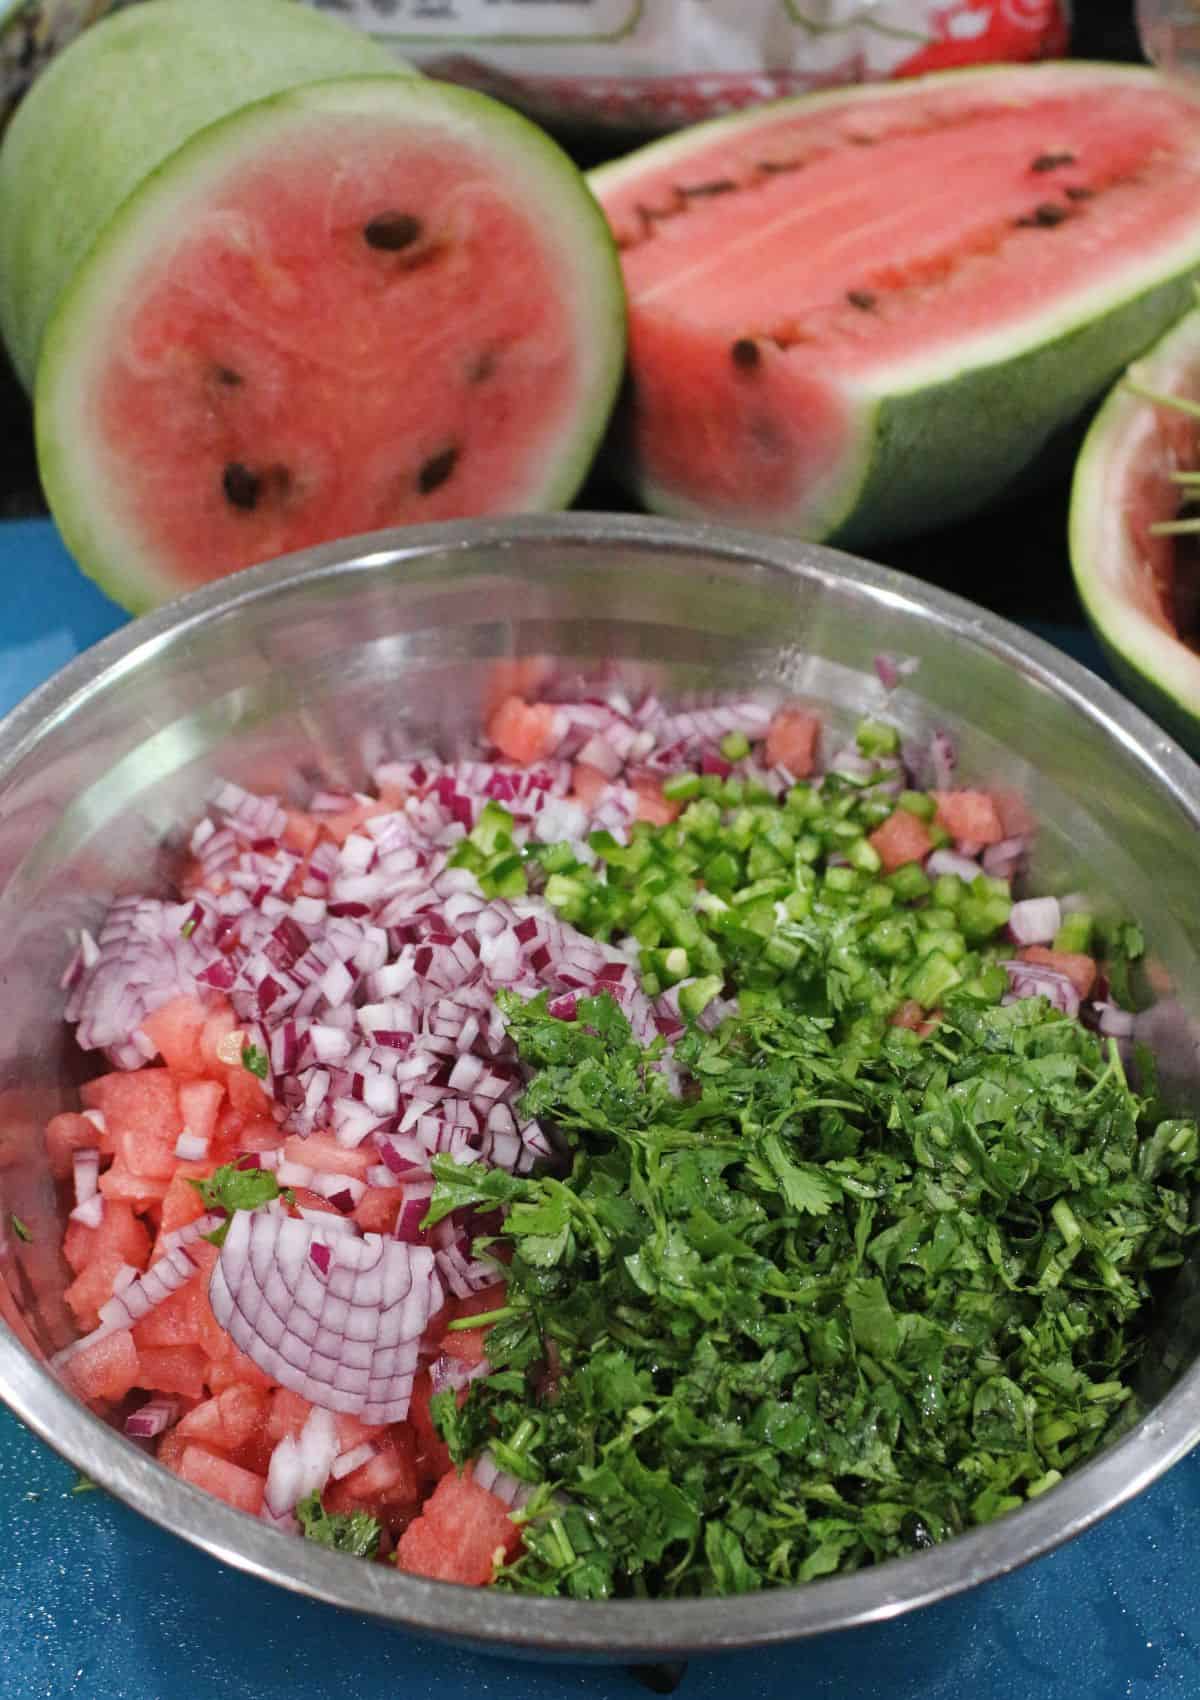 watermelon pieces, onions, jalapeno and cilantro in a bowl